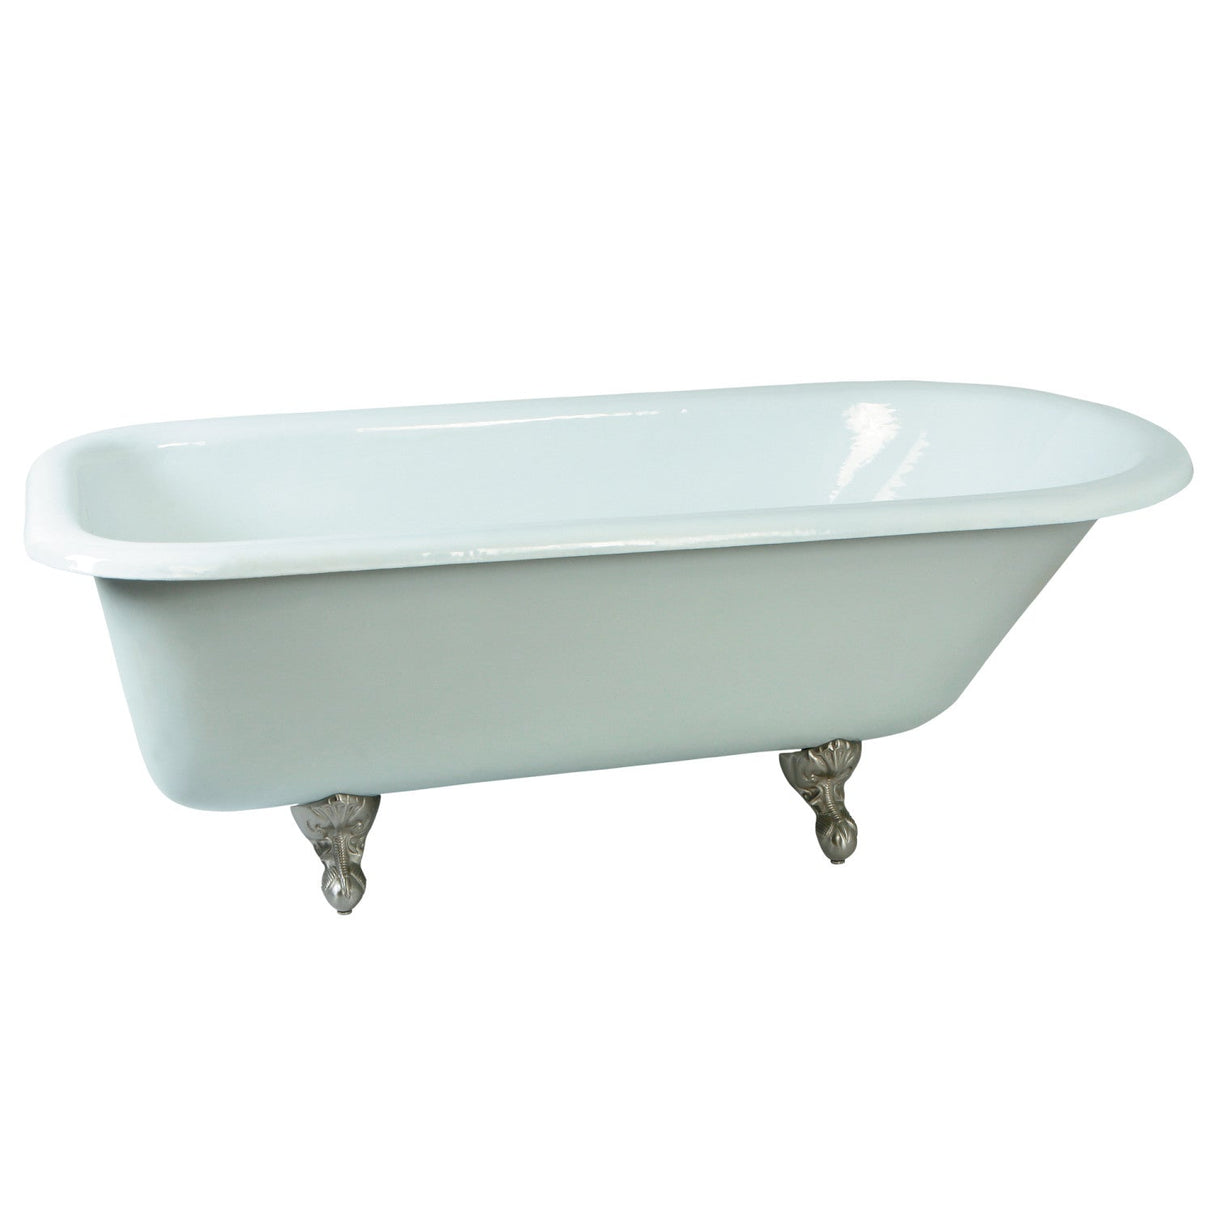 Aqua Eden NHVCTND673123T8 66-Inch Cast Iron Roll Top Clawfoot Tub (No Faucet Drillings), White/Brushed Nickel